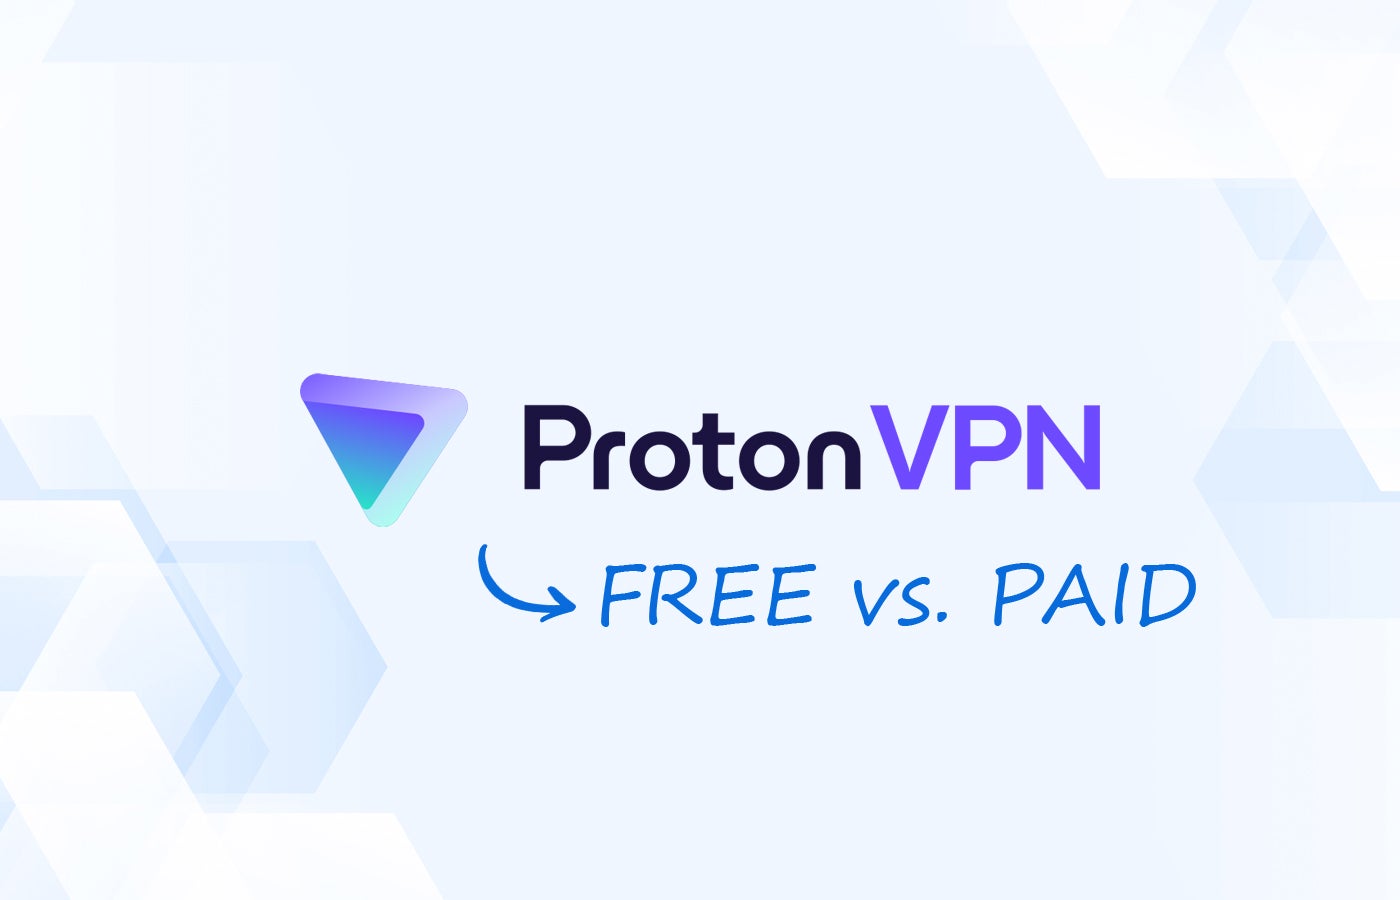 Proton VPN Free vs. Premium: Which Plan Is Best For You?